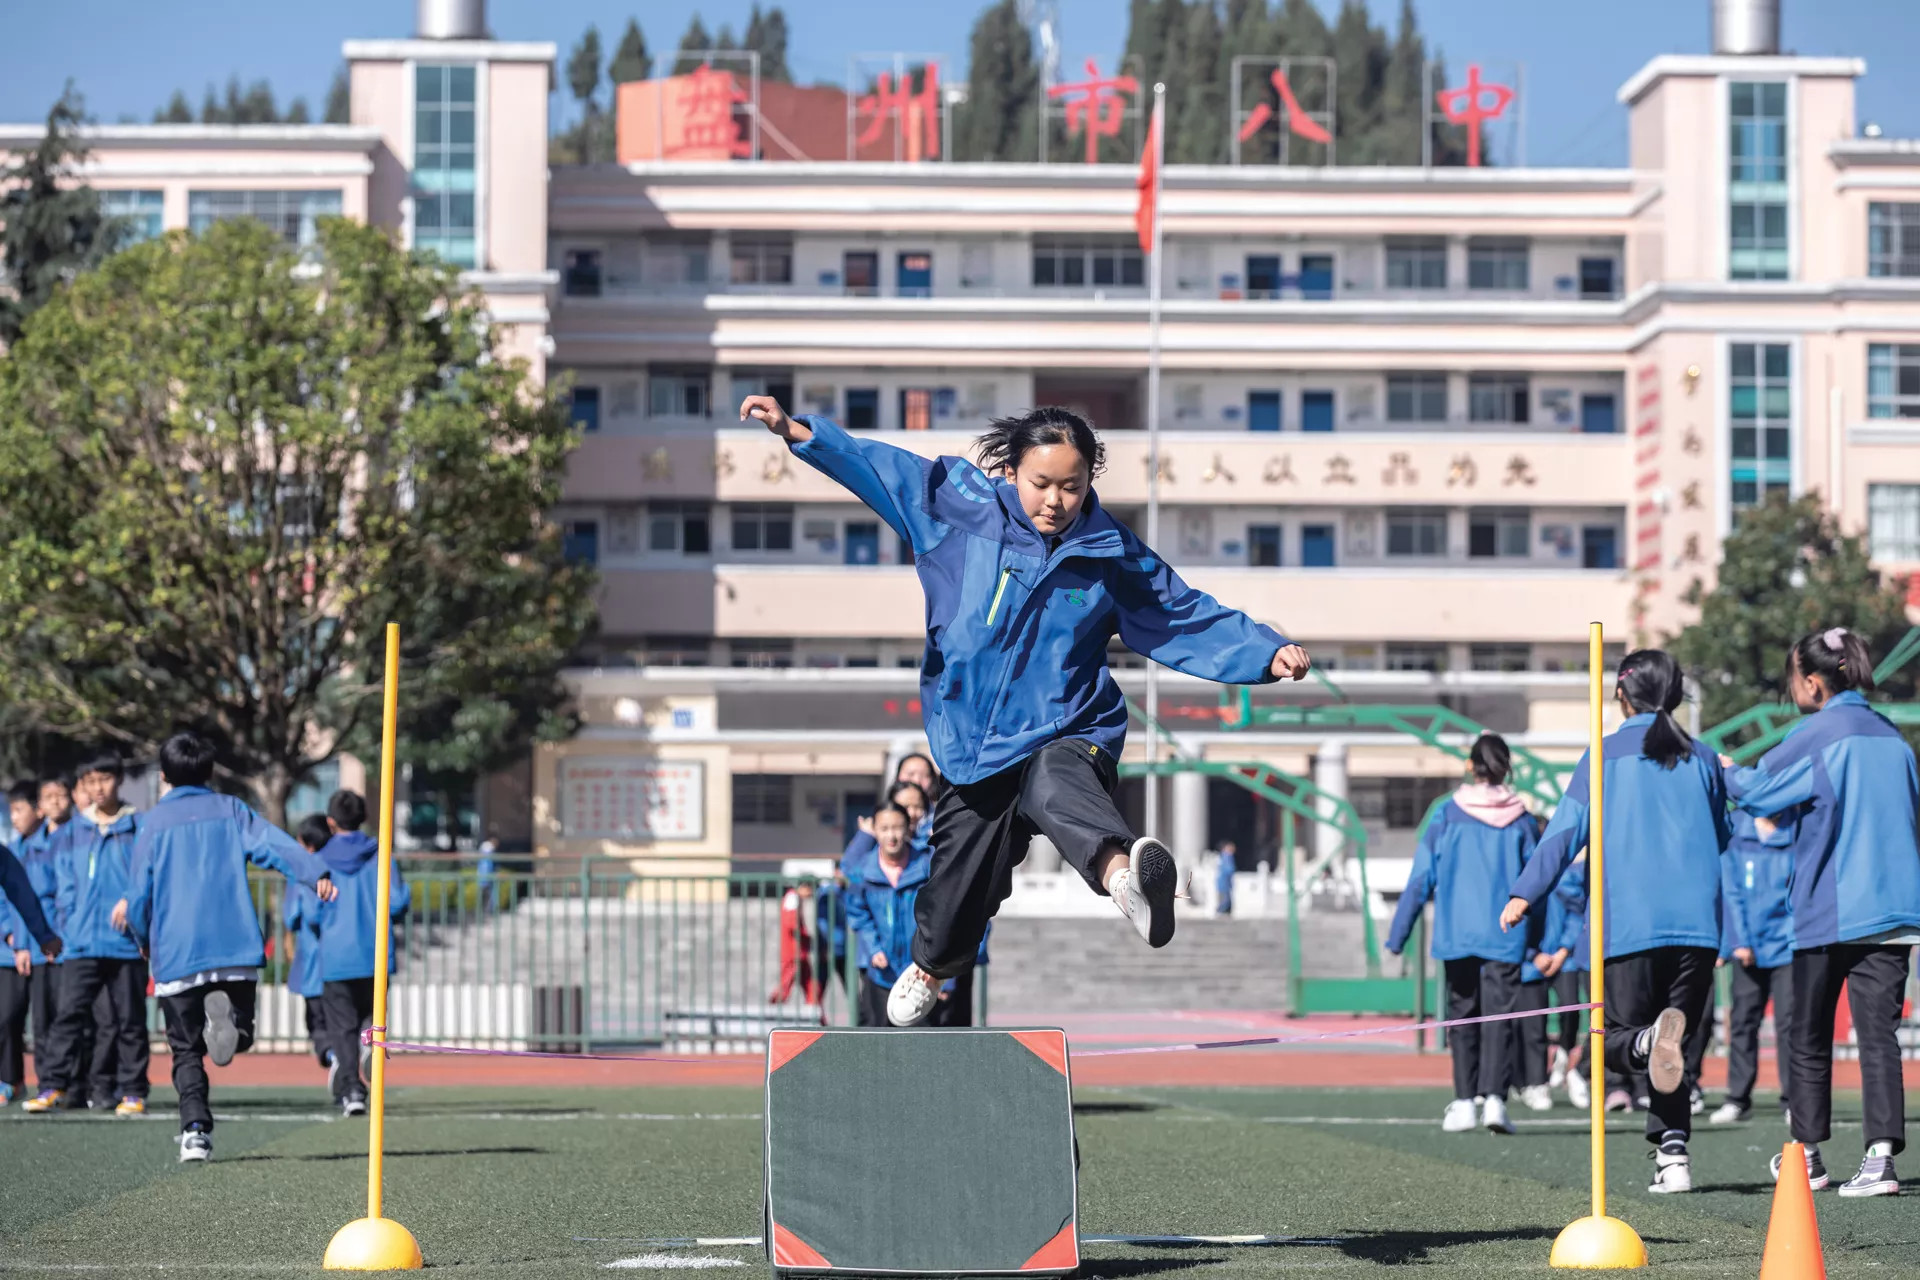 A girl jumps over a barrier during a PE class at a middle school in Panzhou, Guizhou Province, in November 2020.